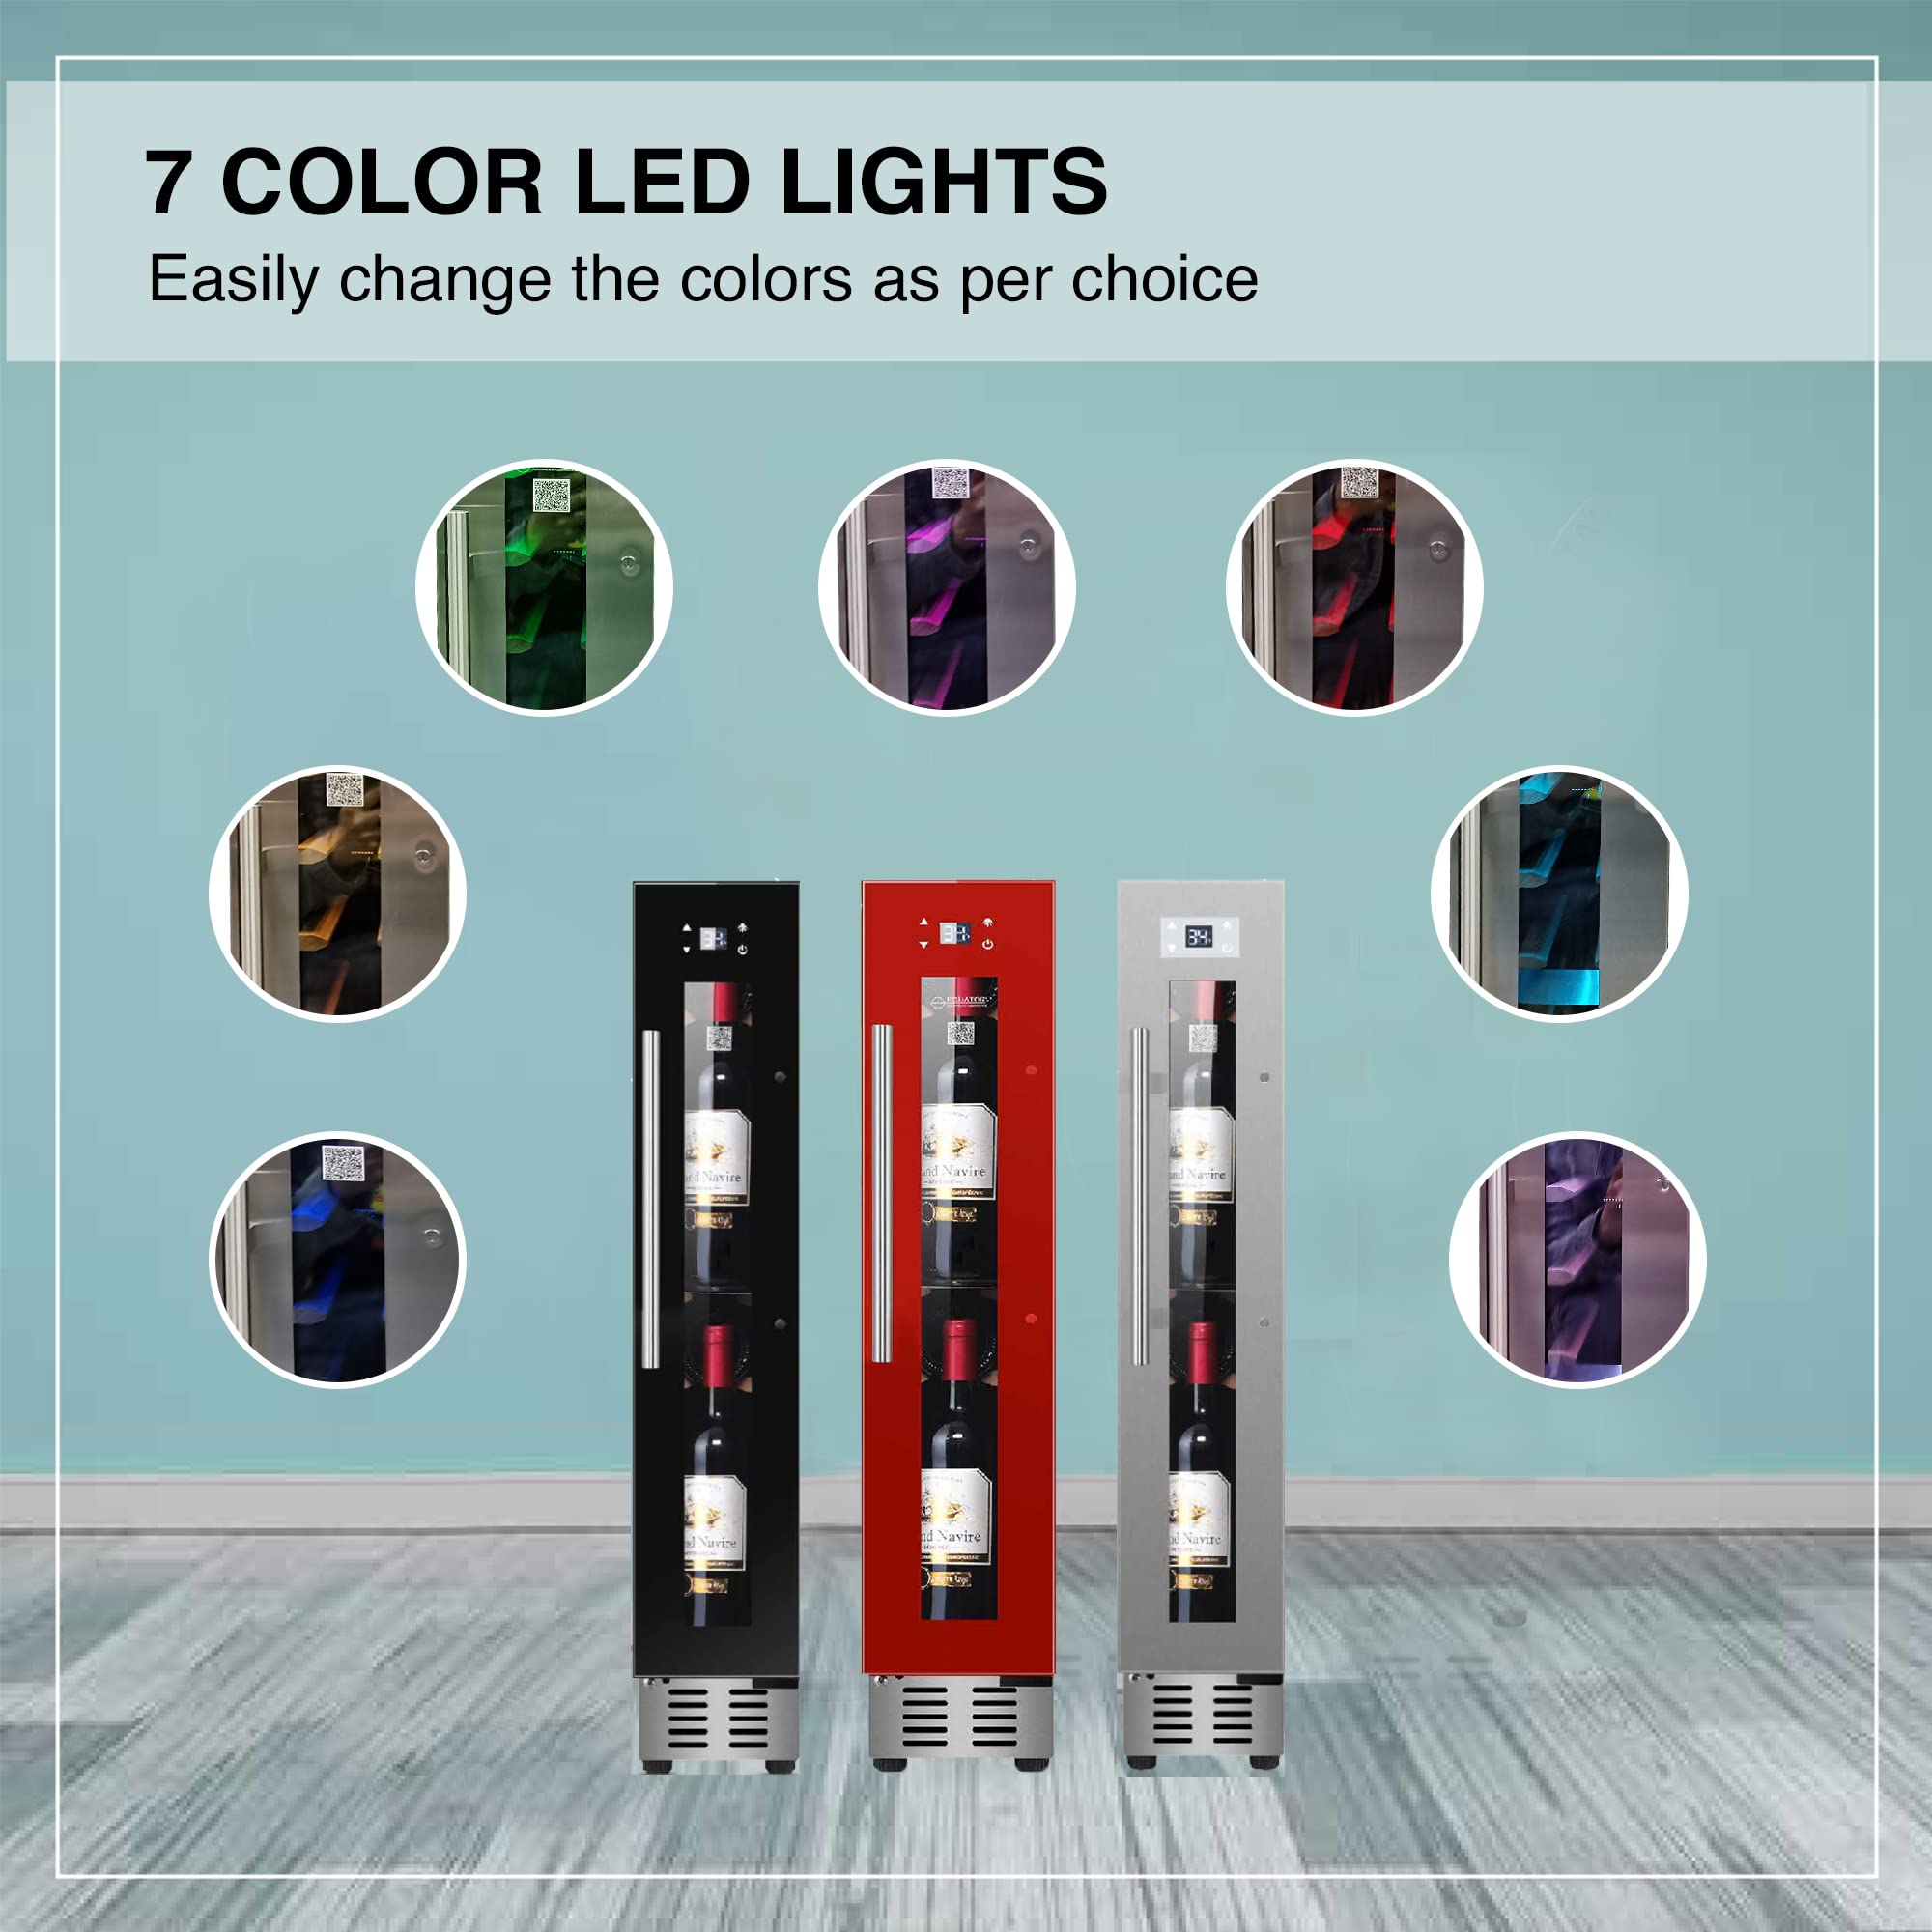 EQUATOR 9 bottle Built-in/Freestanding Wine Ref with 7 color LED Lights (Stainless)